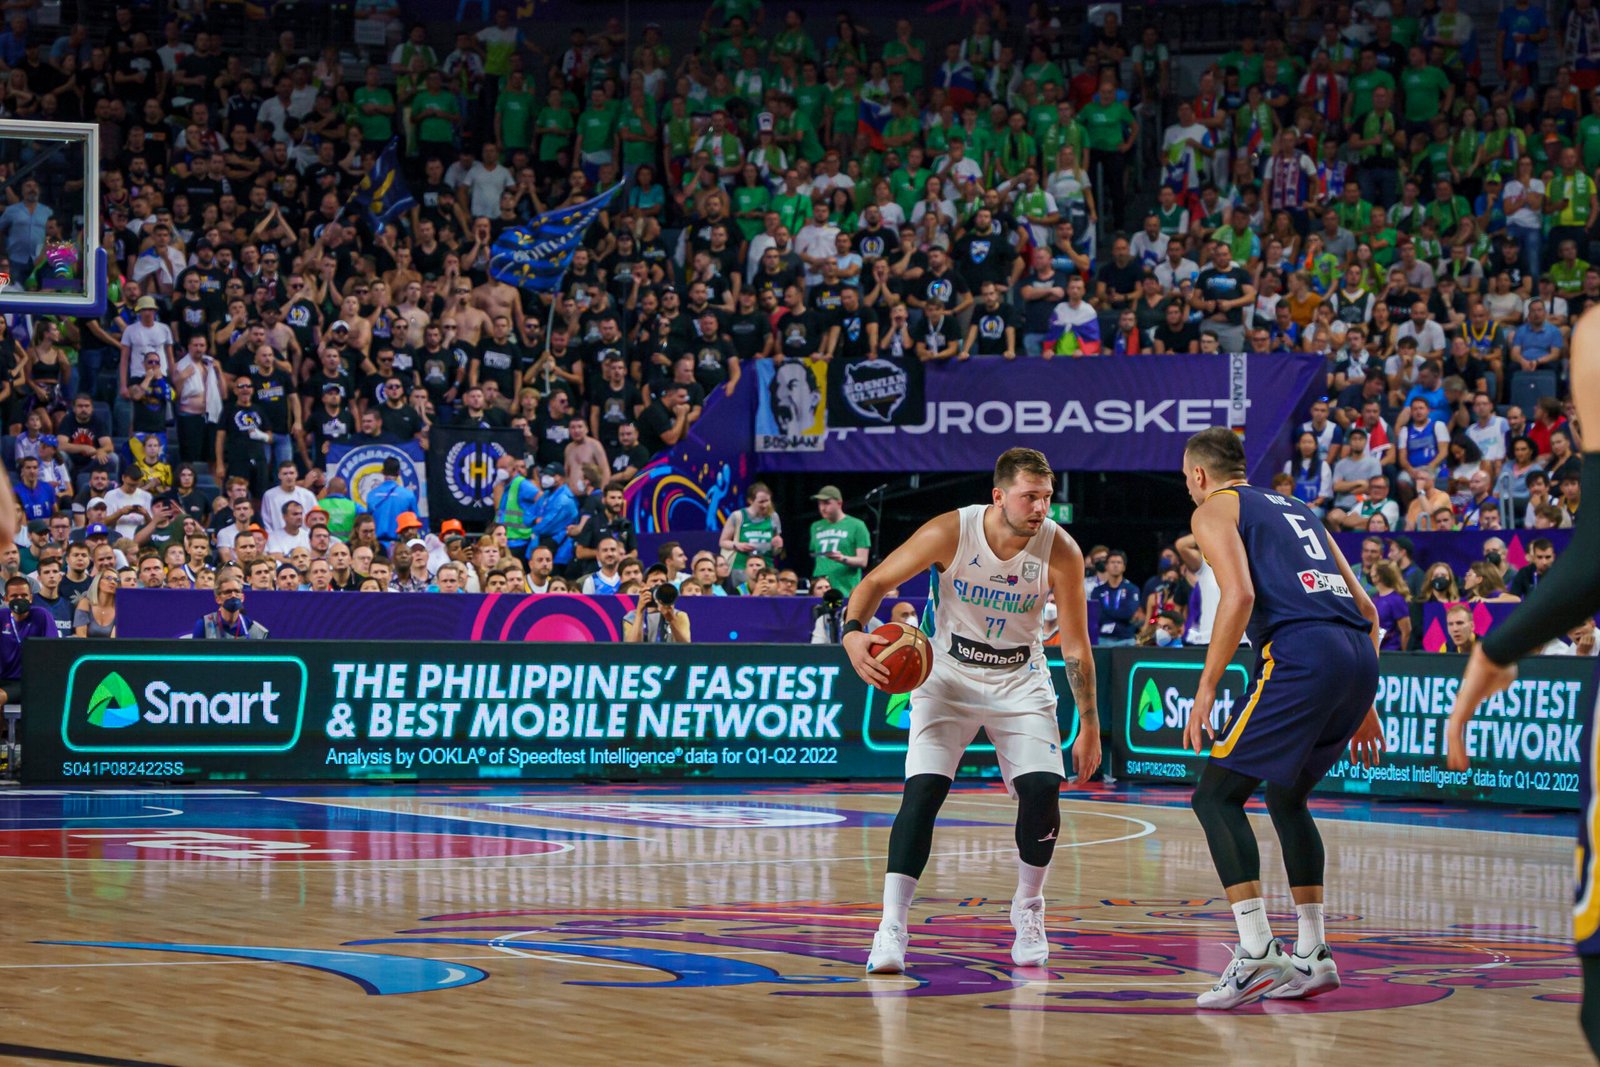 SLOVENIA and Dallas Mavericks superstar Luka Doncic is looking forward to his participation in the FIBAWC 2023 happening in August here in the Philippines. Slovenia is part of the final 32 teams advancing to the final stretch of the FIBAWC 2023.